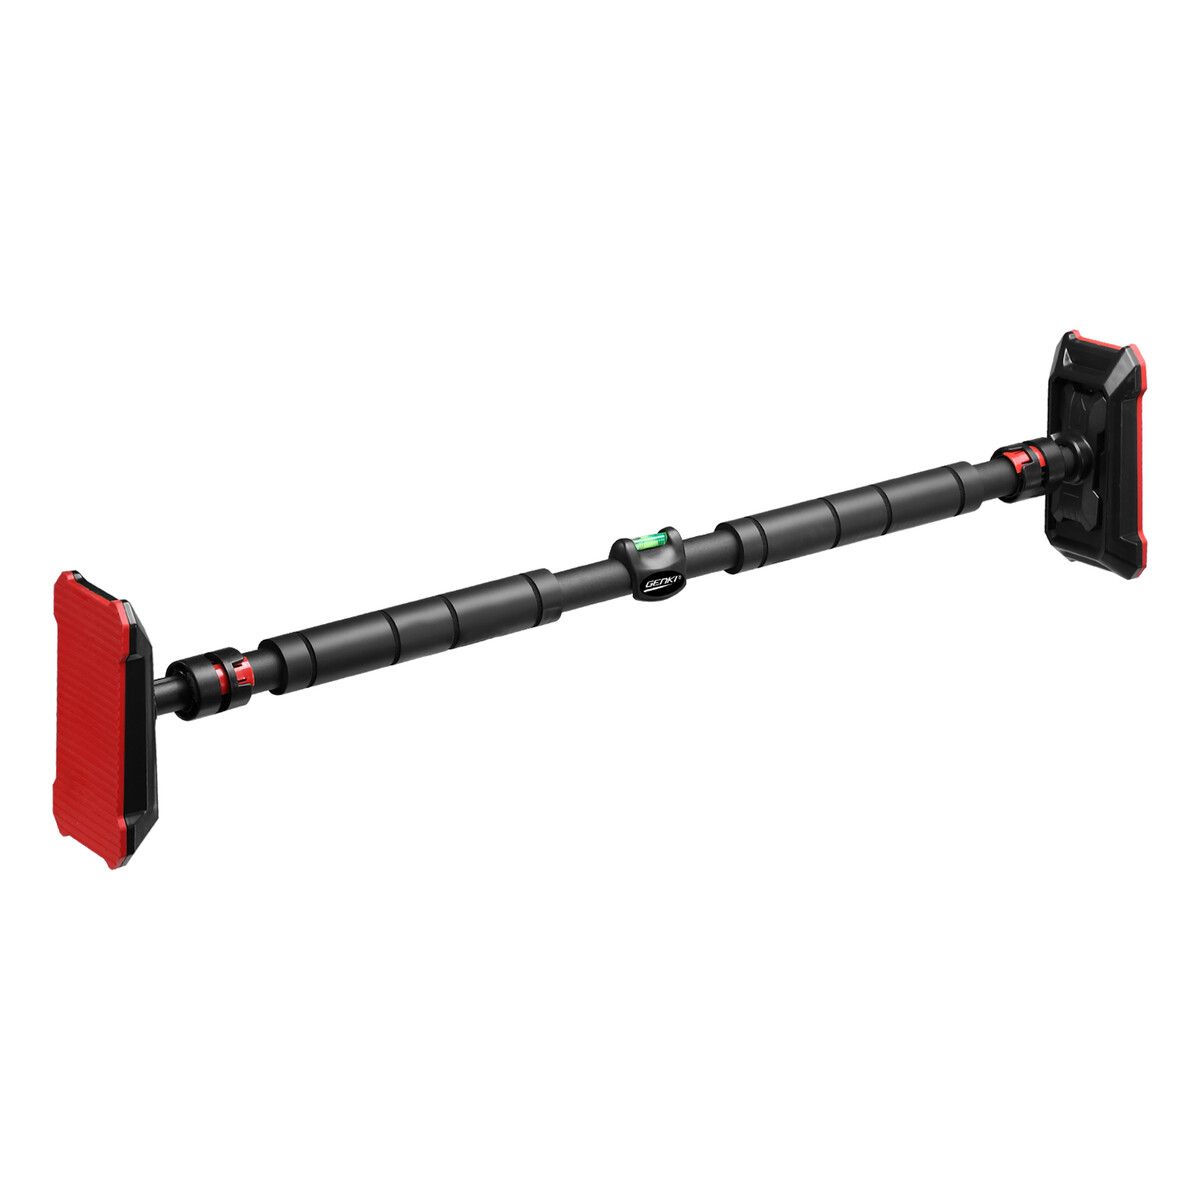 Genki Adjustable Horizontal Pull-Up Bar - Two Sizes Available